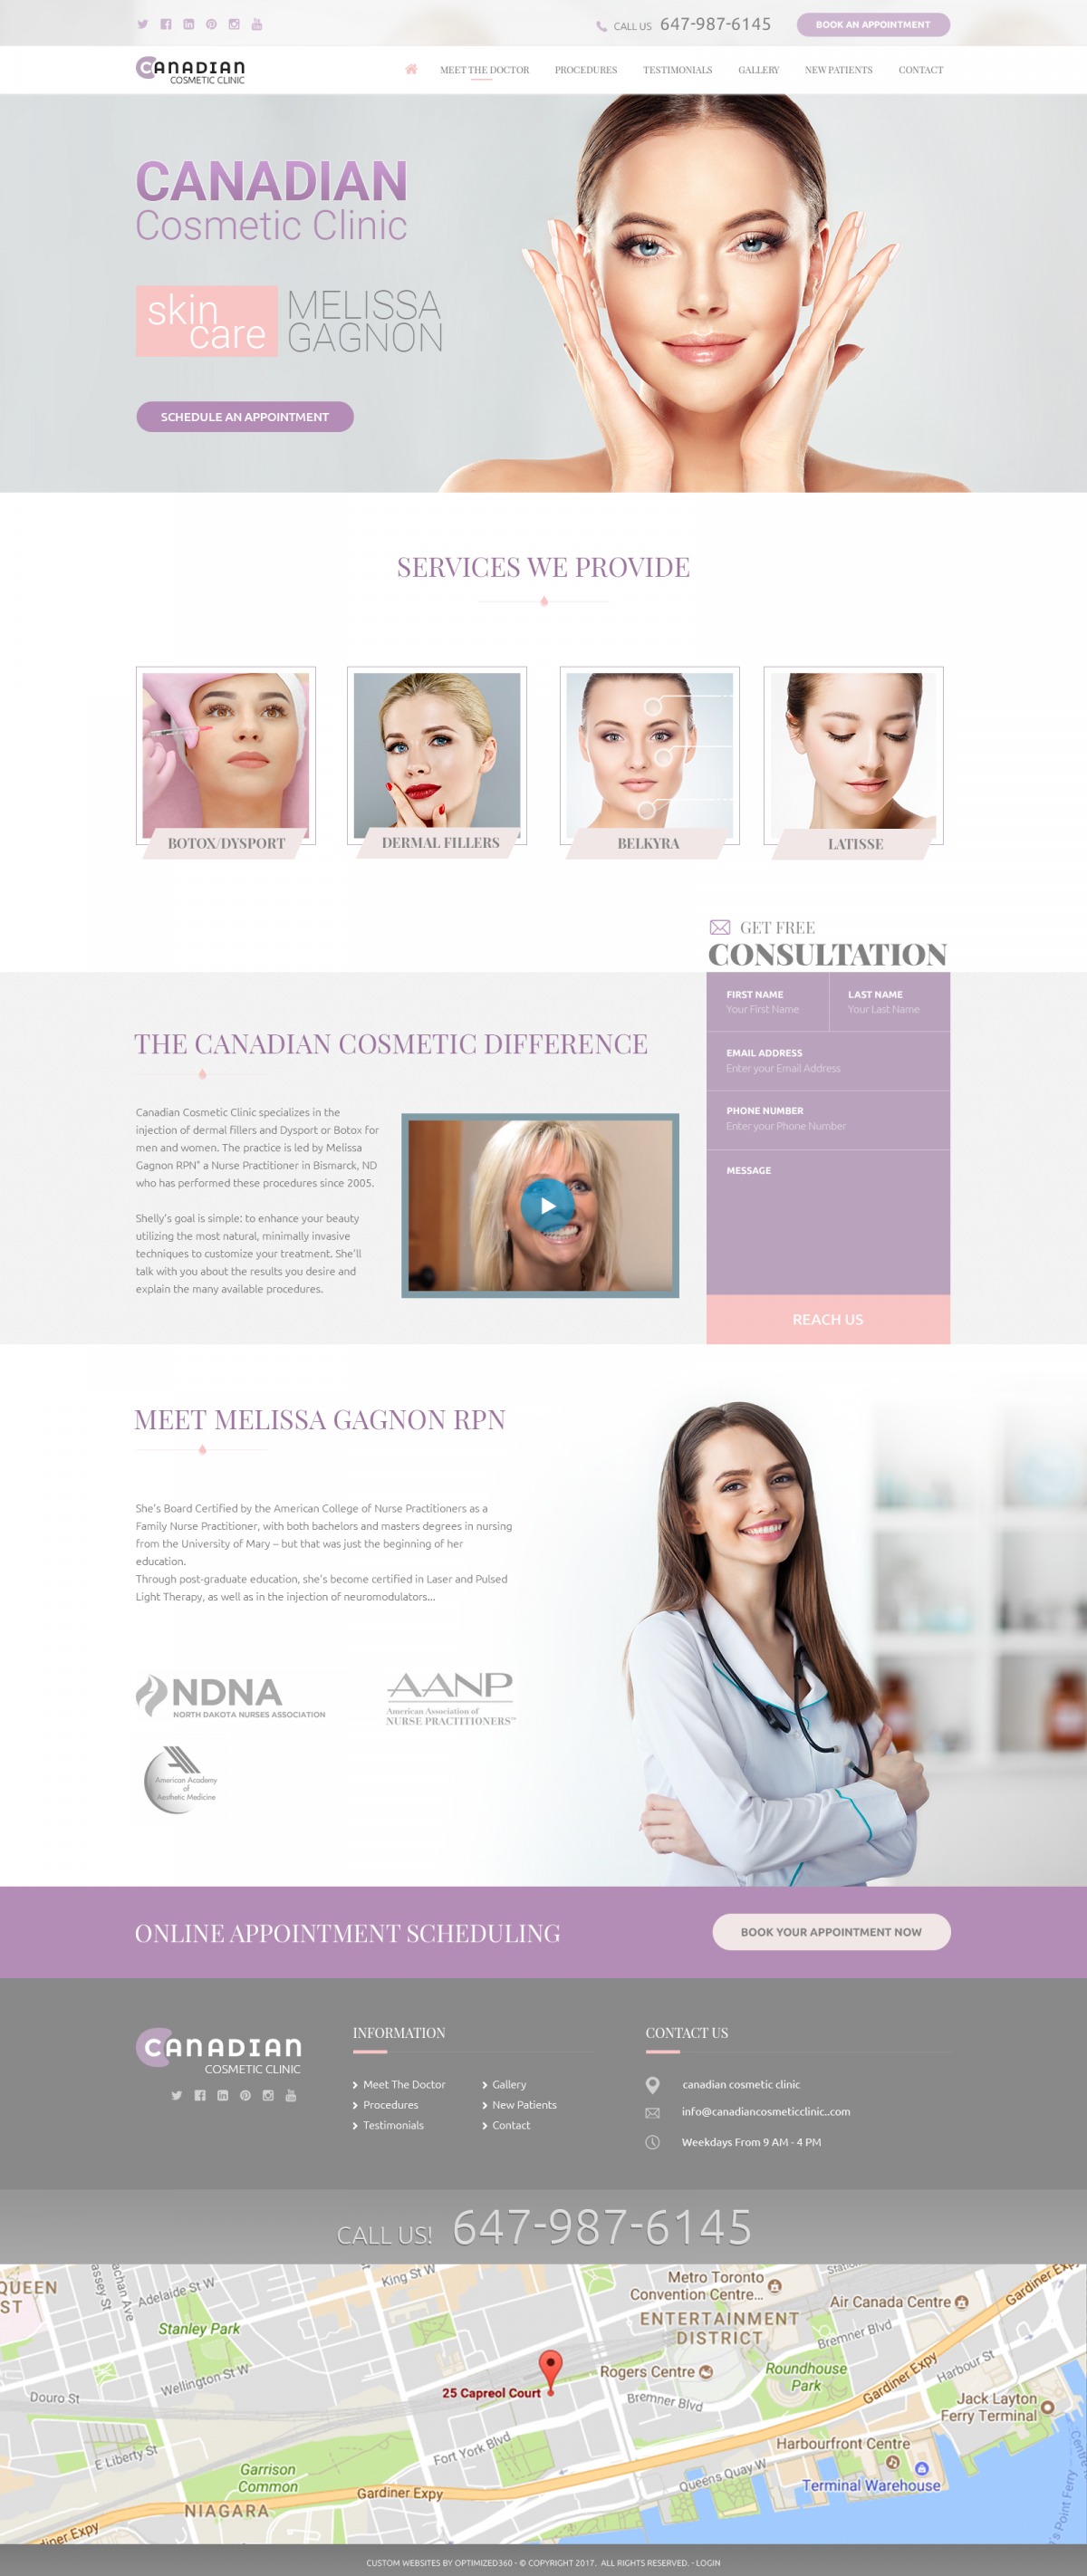 Canadian Cosmetic Clinic Website Sample